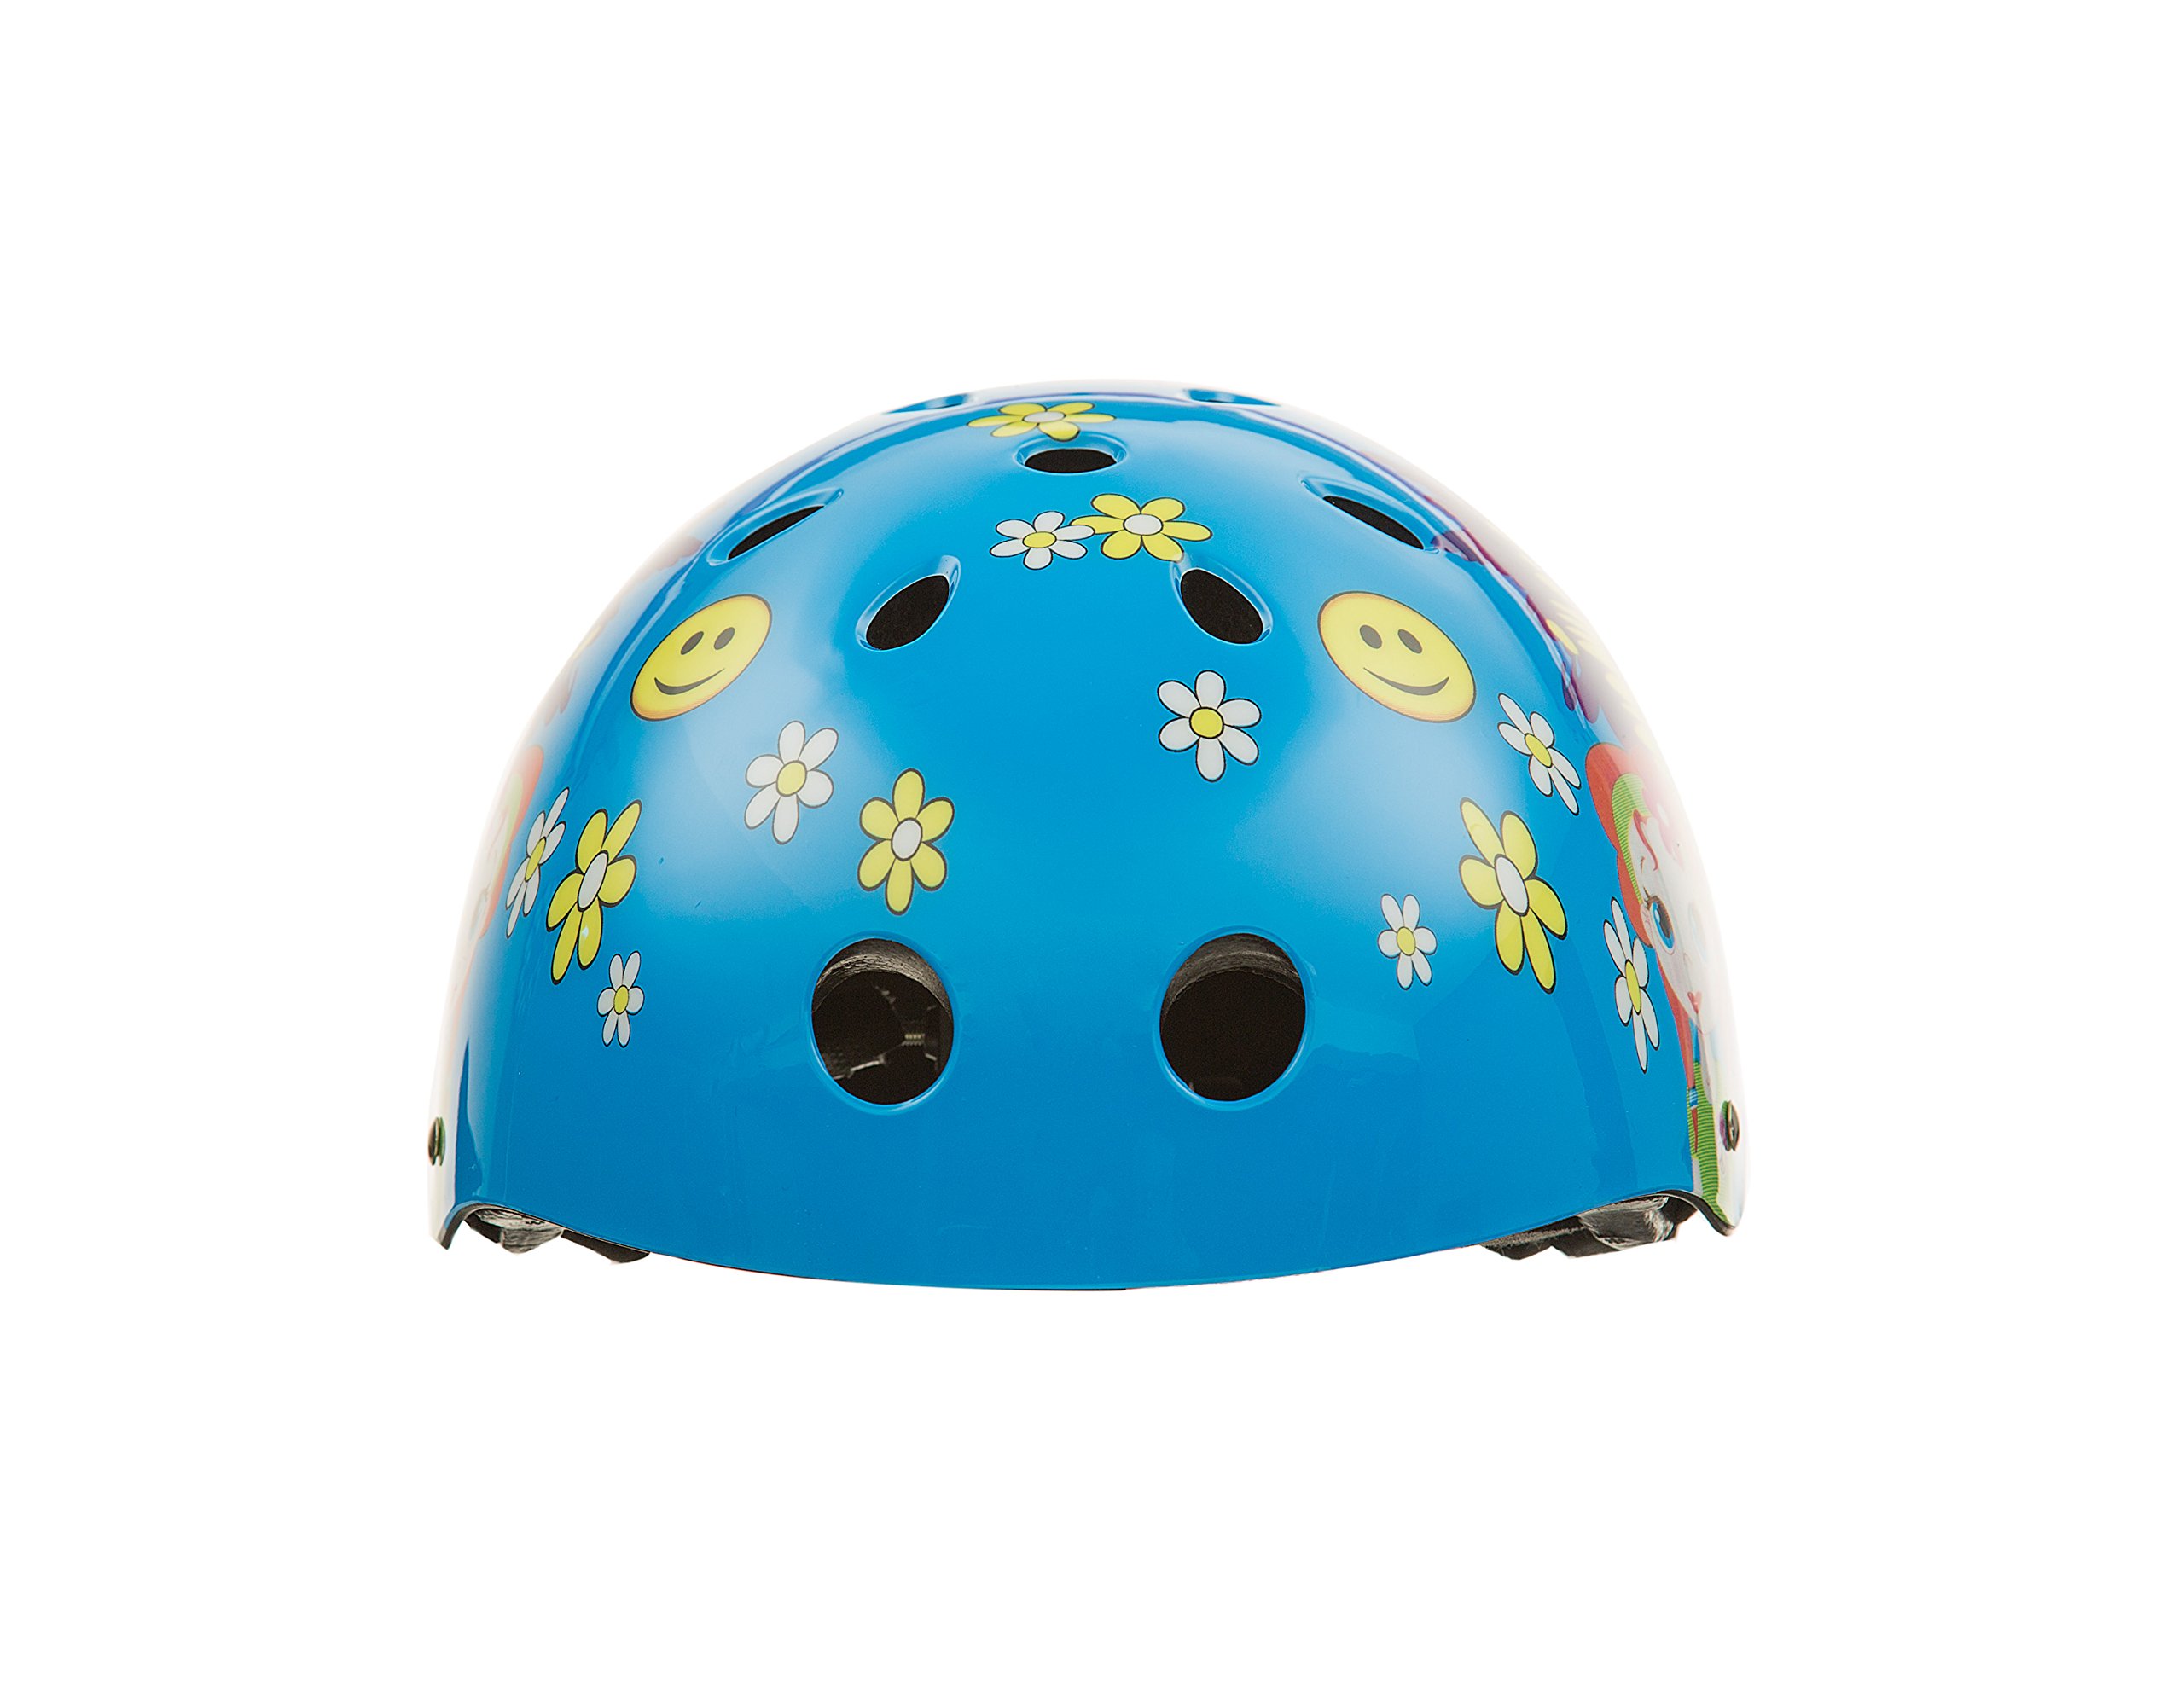 Titan Flower Power Princess 11 Vents Protective BMX and Skateboard Helmet, Kid Size Small, Age 5 and up